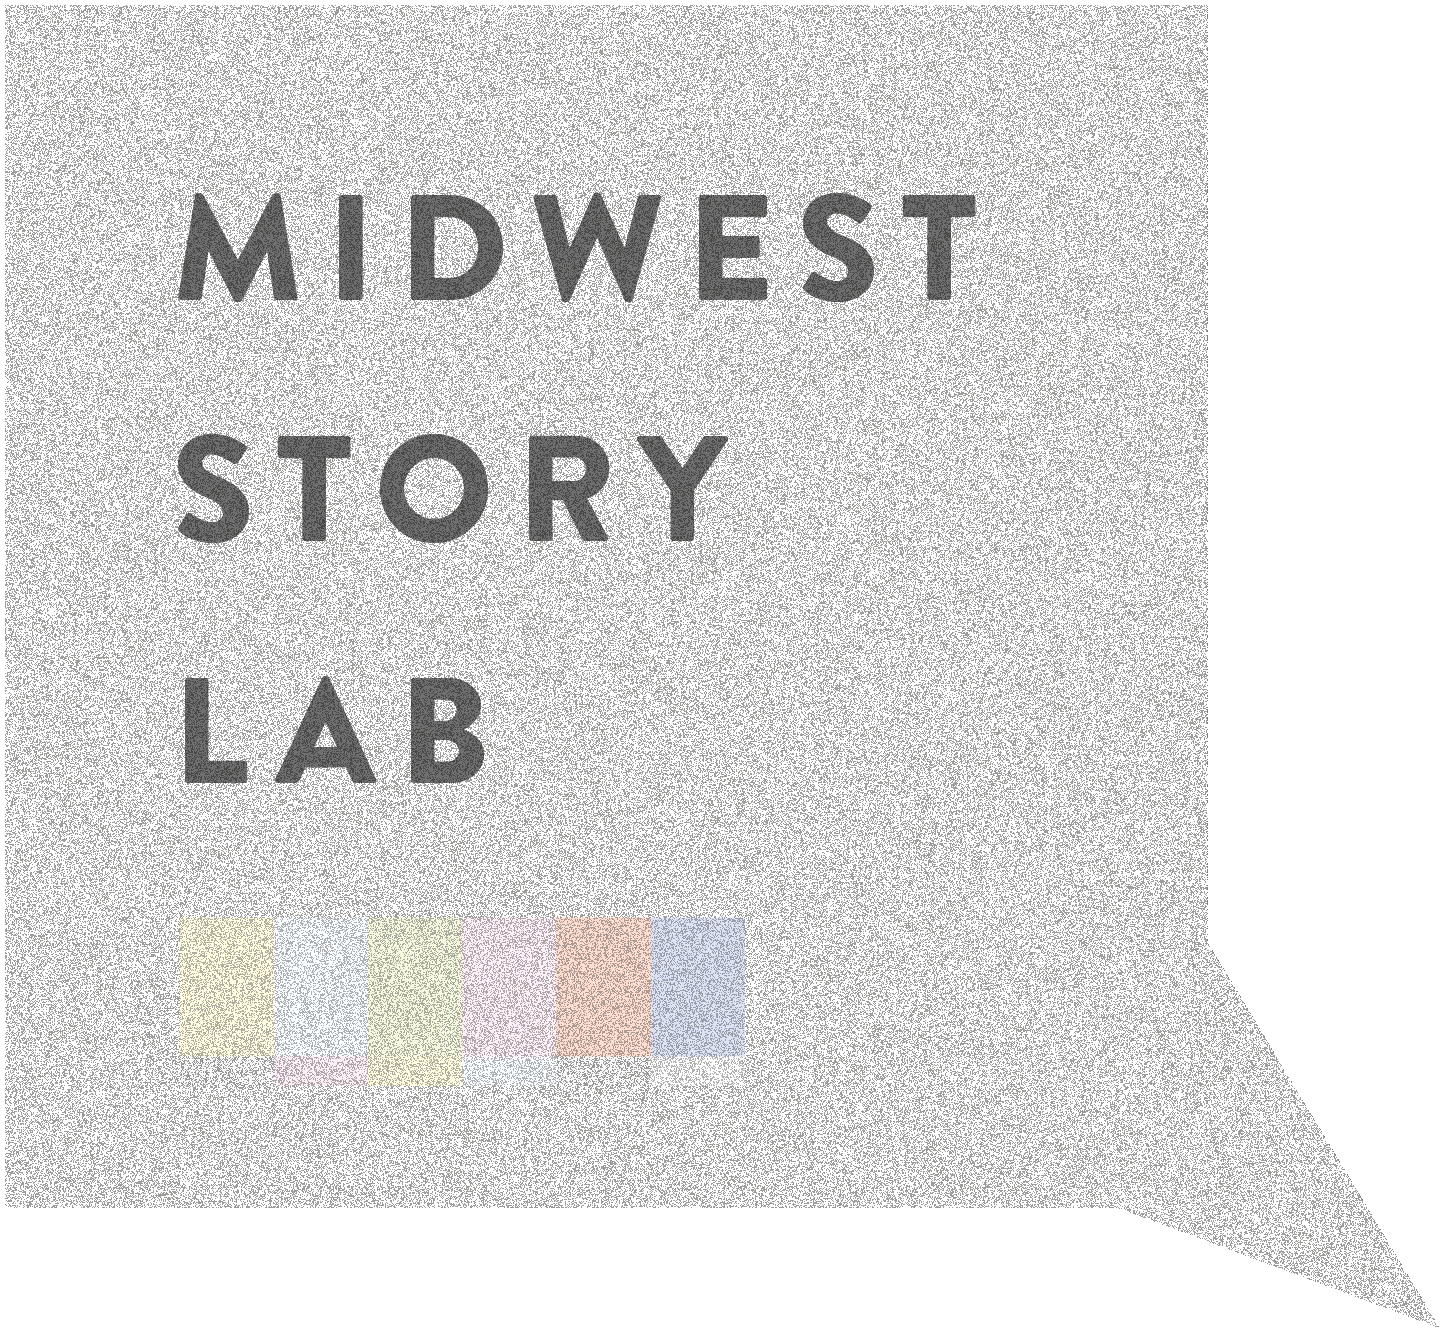 Midwest Story Lab